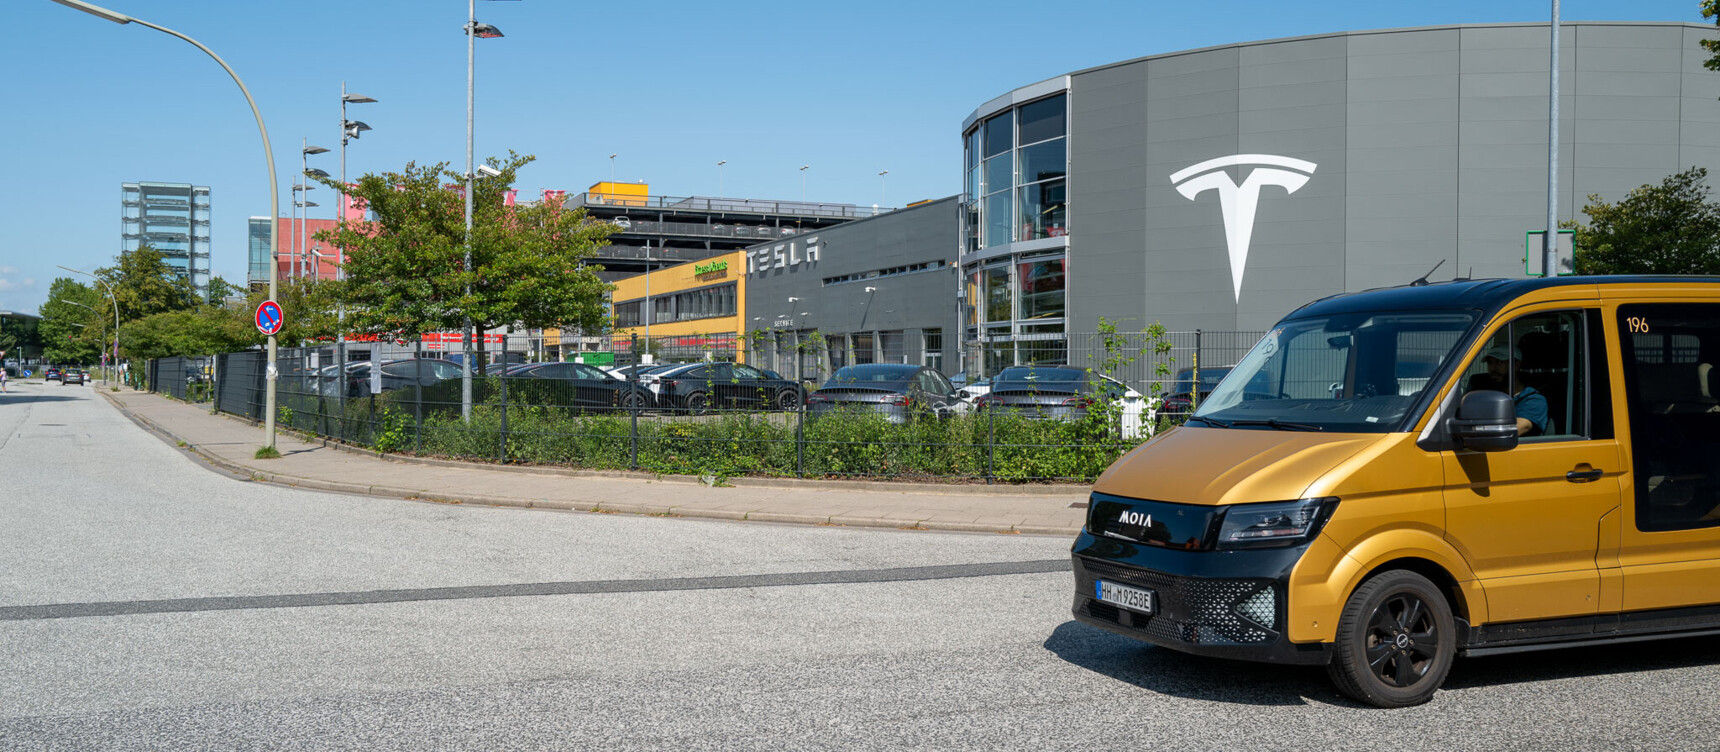 Moia car in front of the Tesla building at the Friedrich-Ebert-Damm location